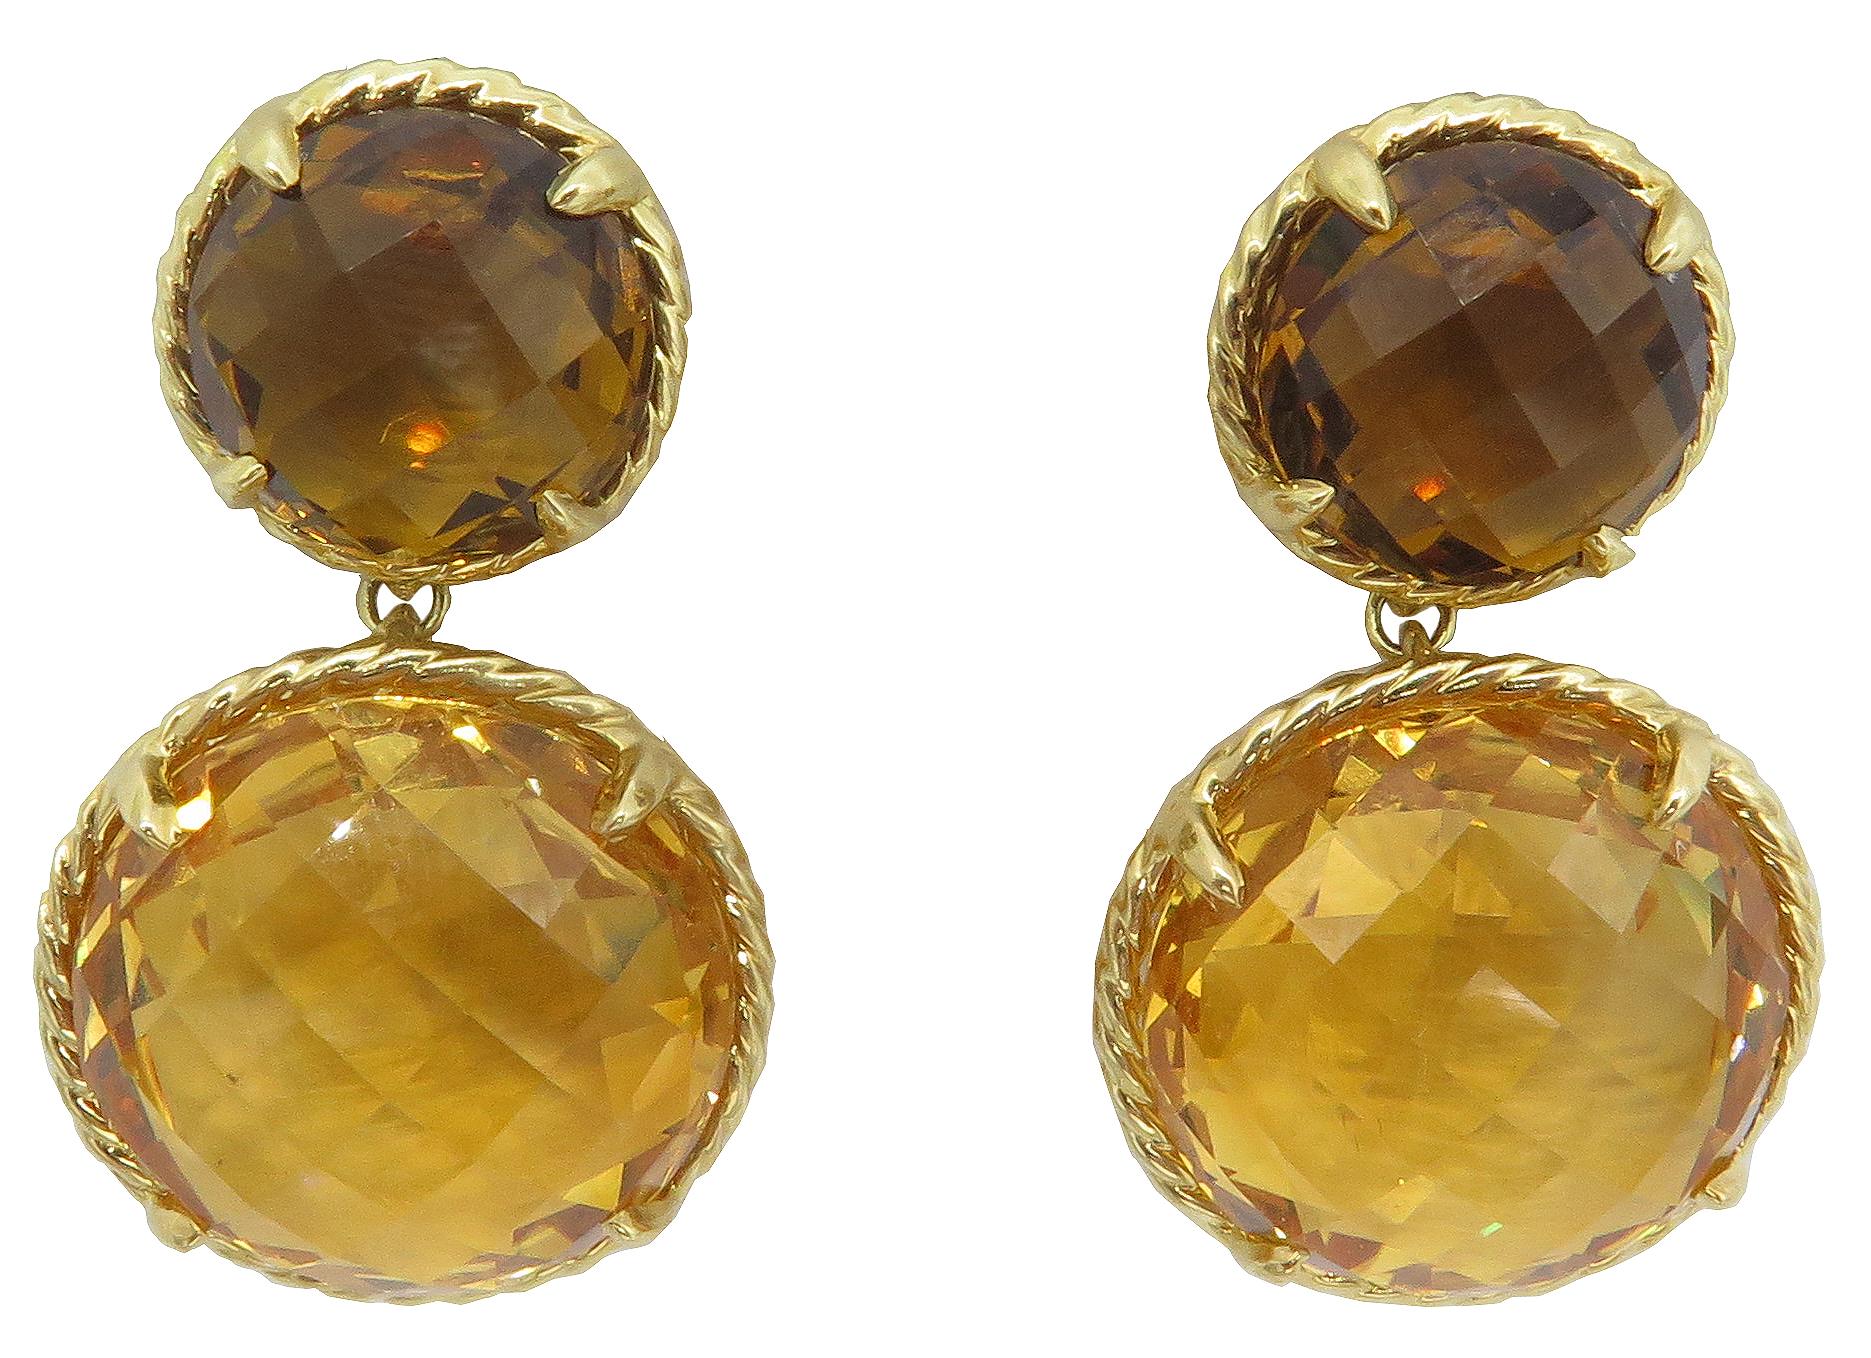 A 18K yellow gold double-drop earrings from David Yurman's Chatelaine collection set with two Citrine stones. The neutral shade of the stones matches everything! You can wear it with a suit, fancy dress, or everyday. Also, featuring great sturdy